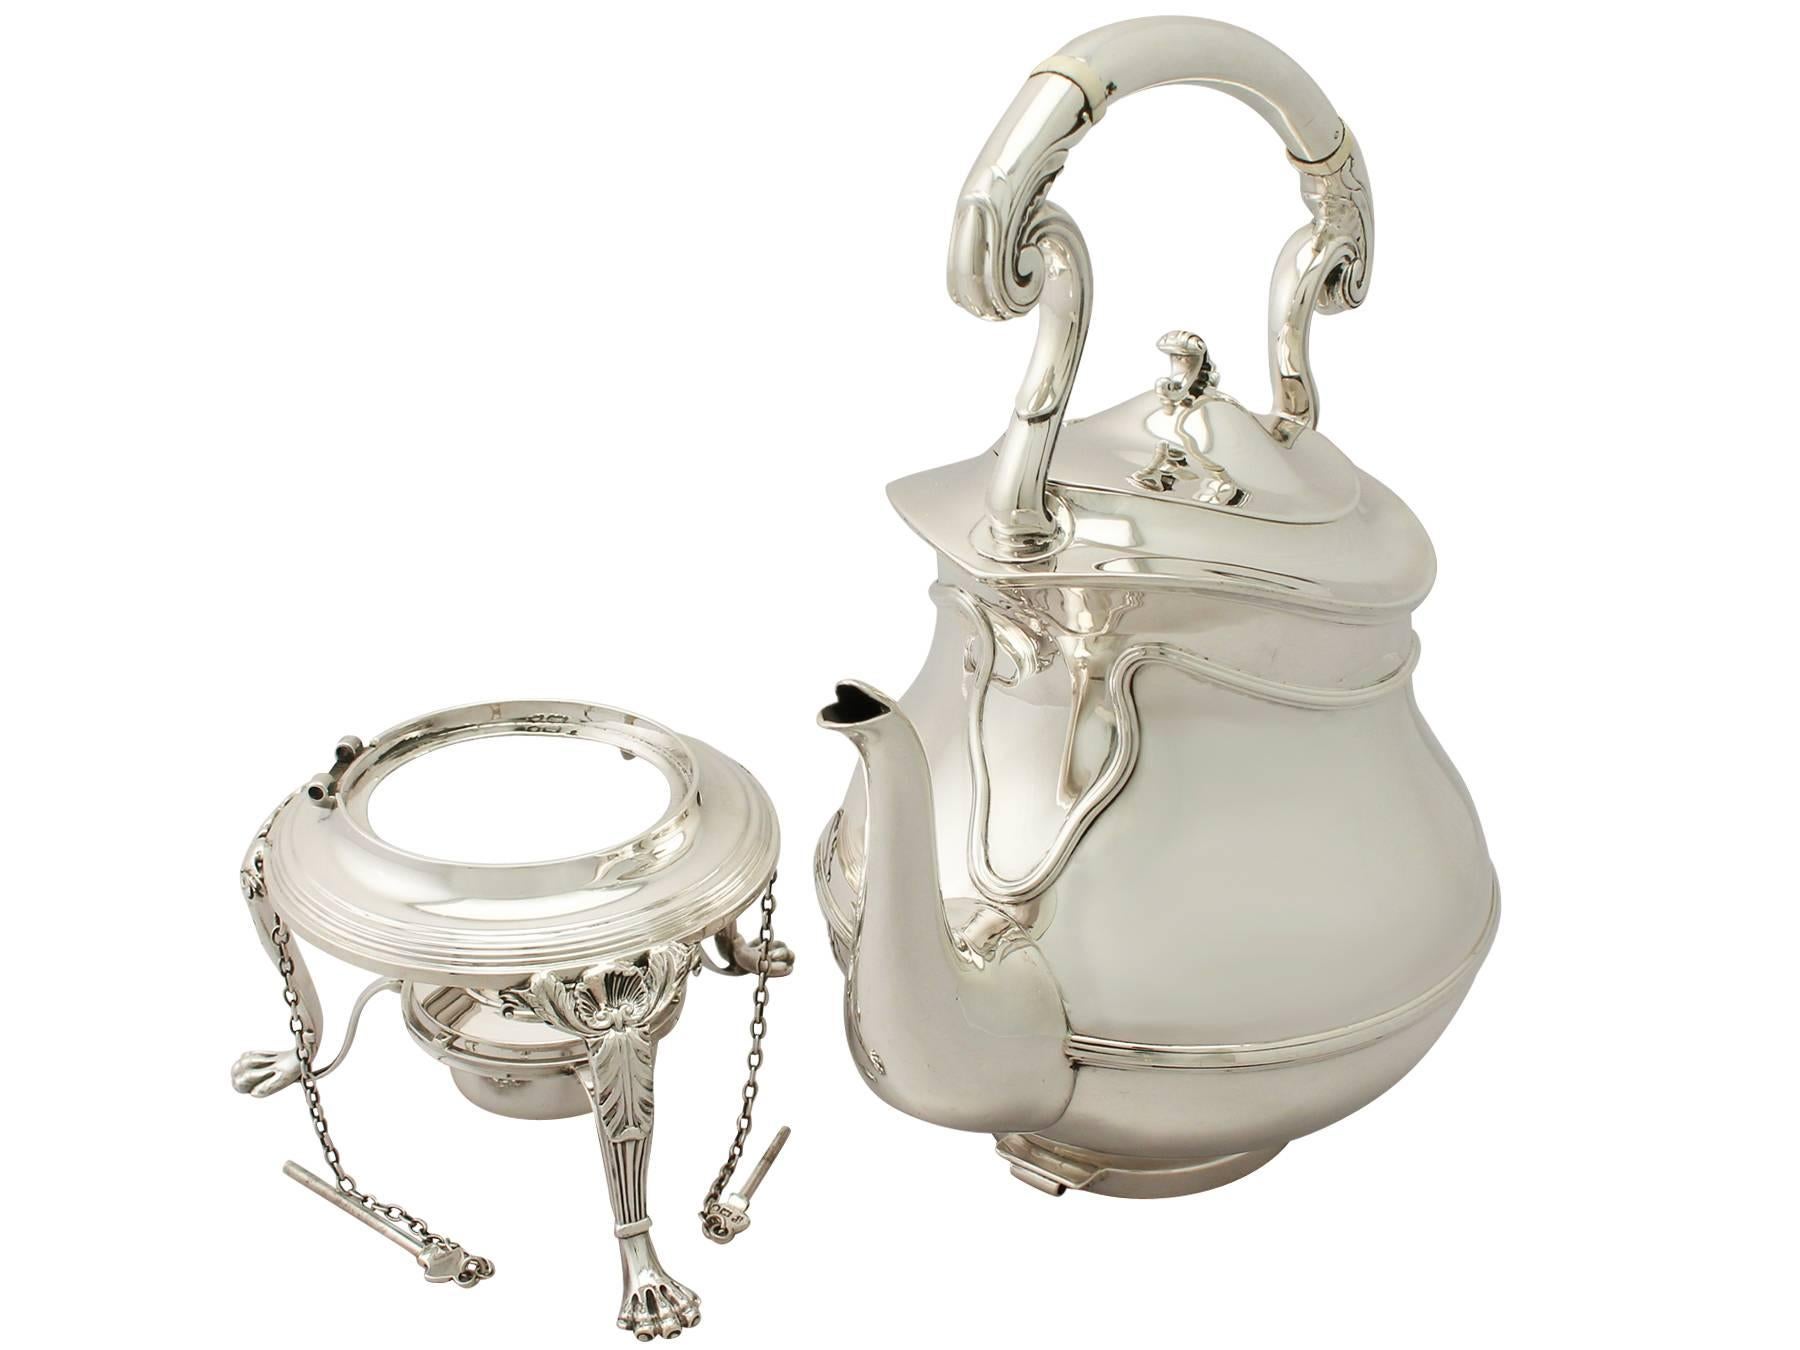 Early 20th Century Antique Art Nouveau Style Sterling Silver Five-Piece Tea and Coffee Service